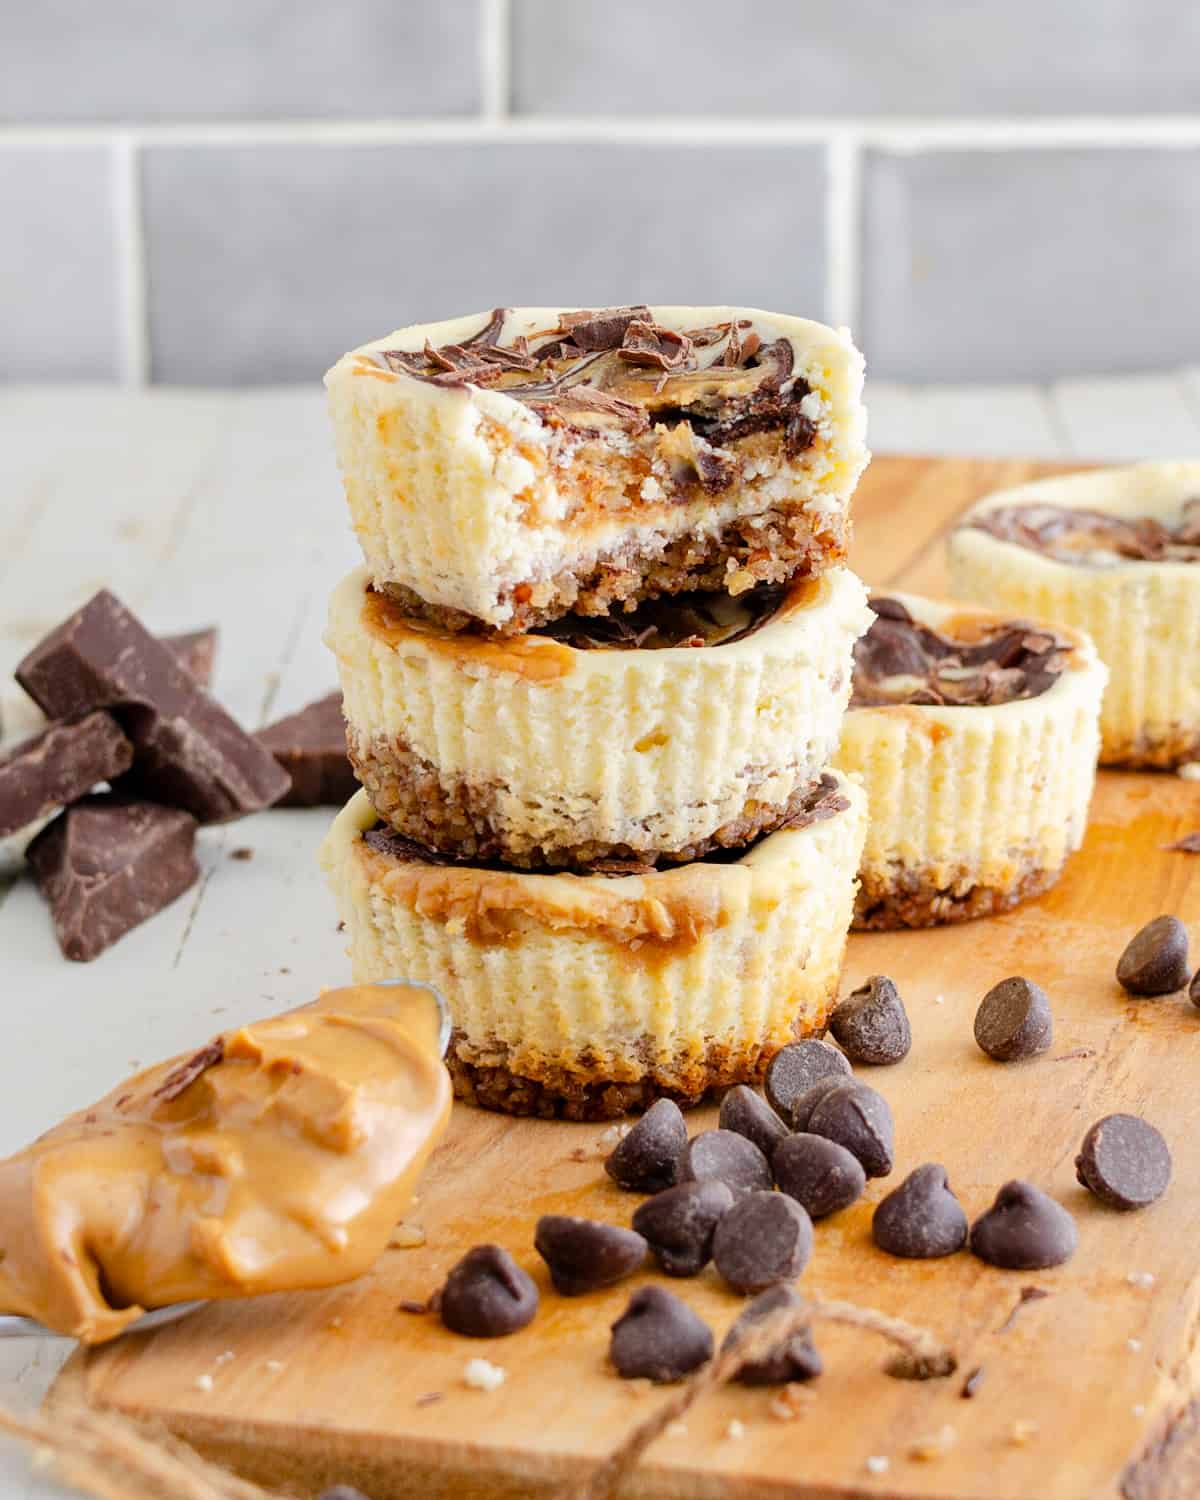 Mini muffin tin keto cheesecakes stacked on a wooden board with a bite out of them showing the chocolate and peanut butter inside.